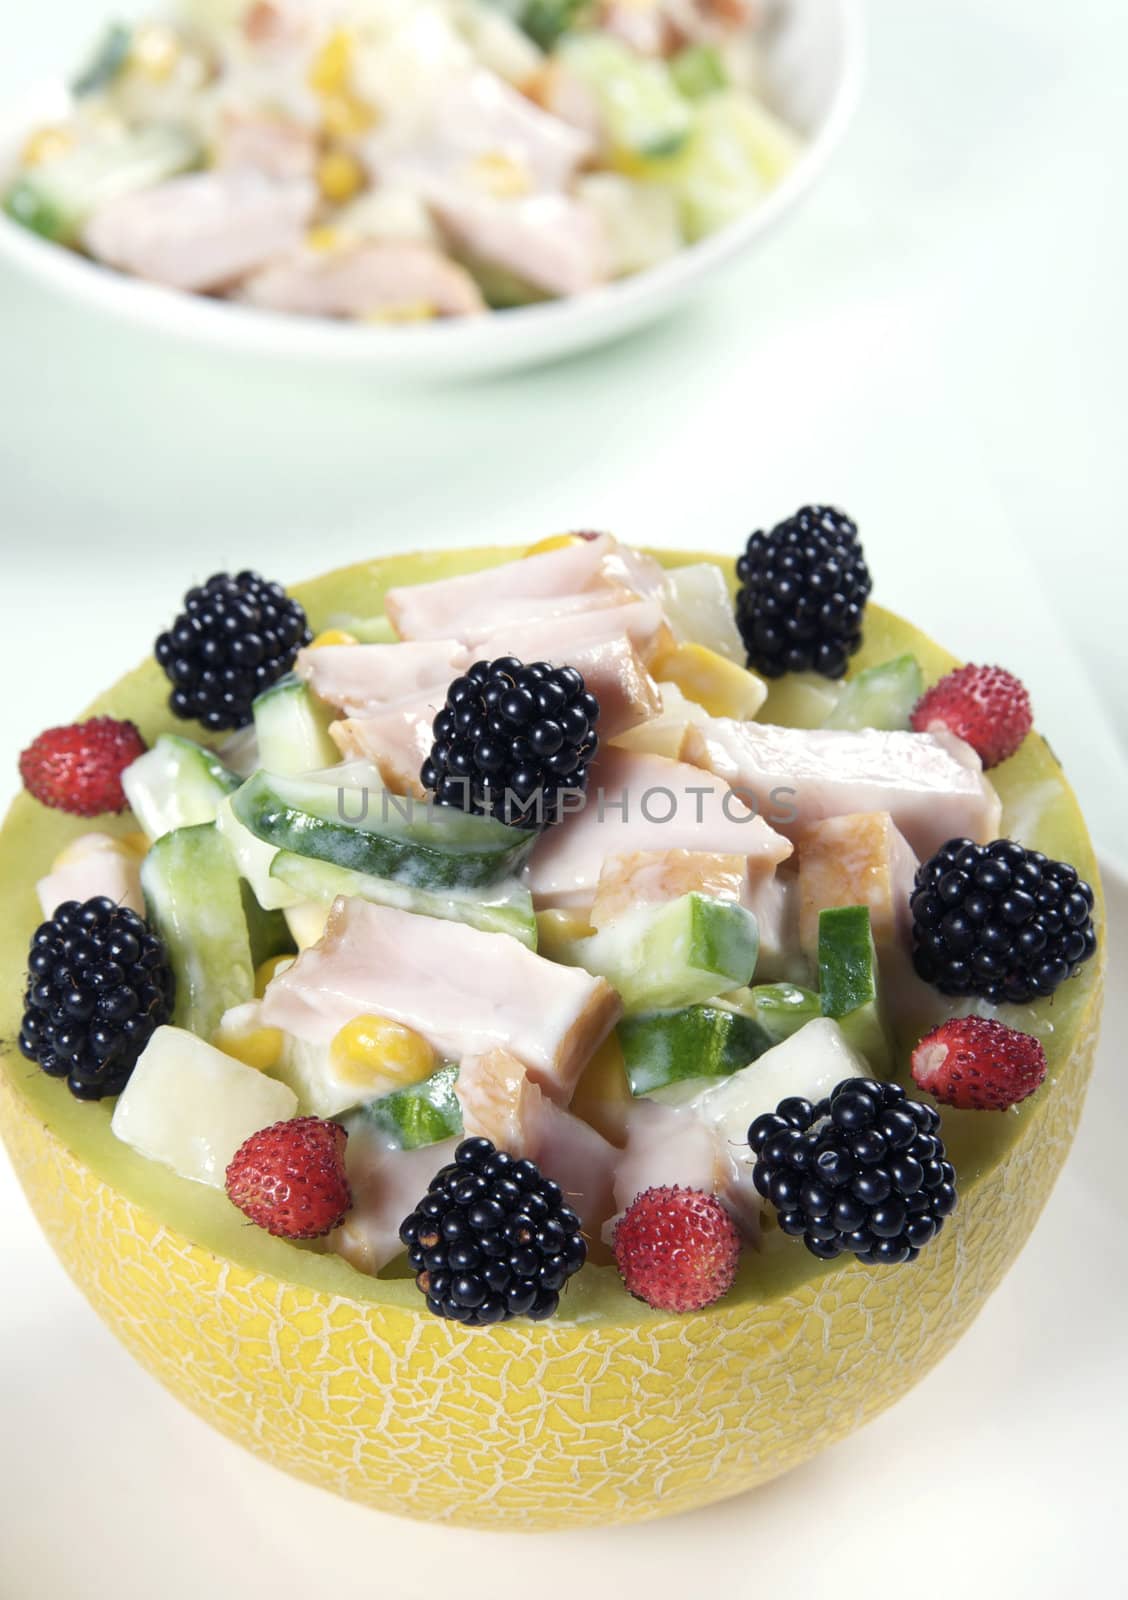 chicken with fruits in melon - delicious dessert 

